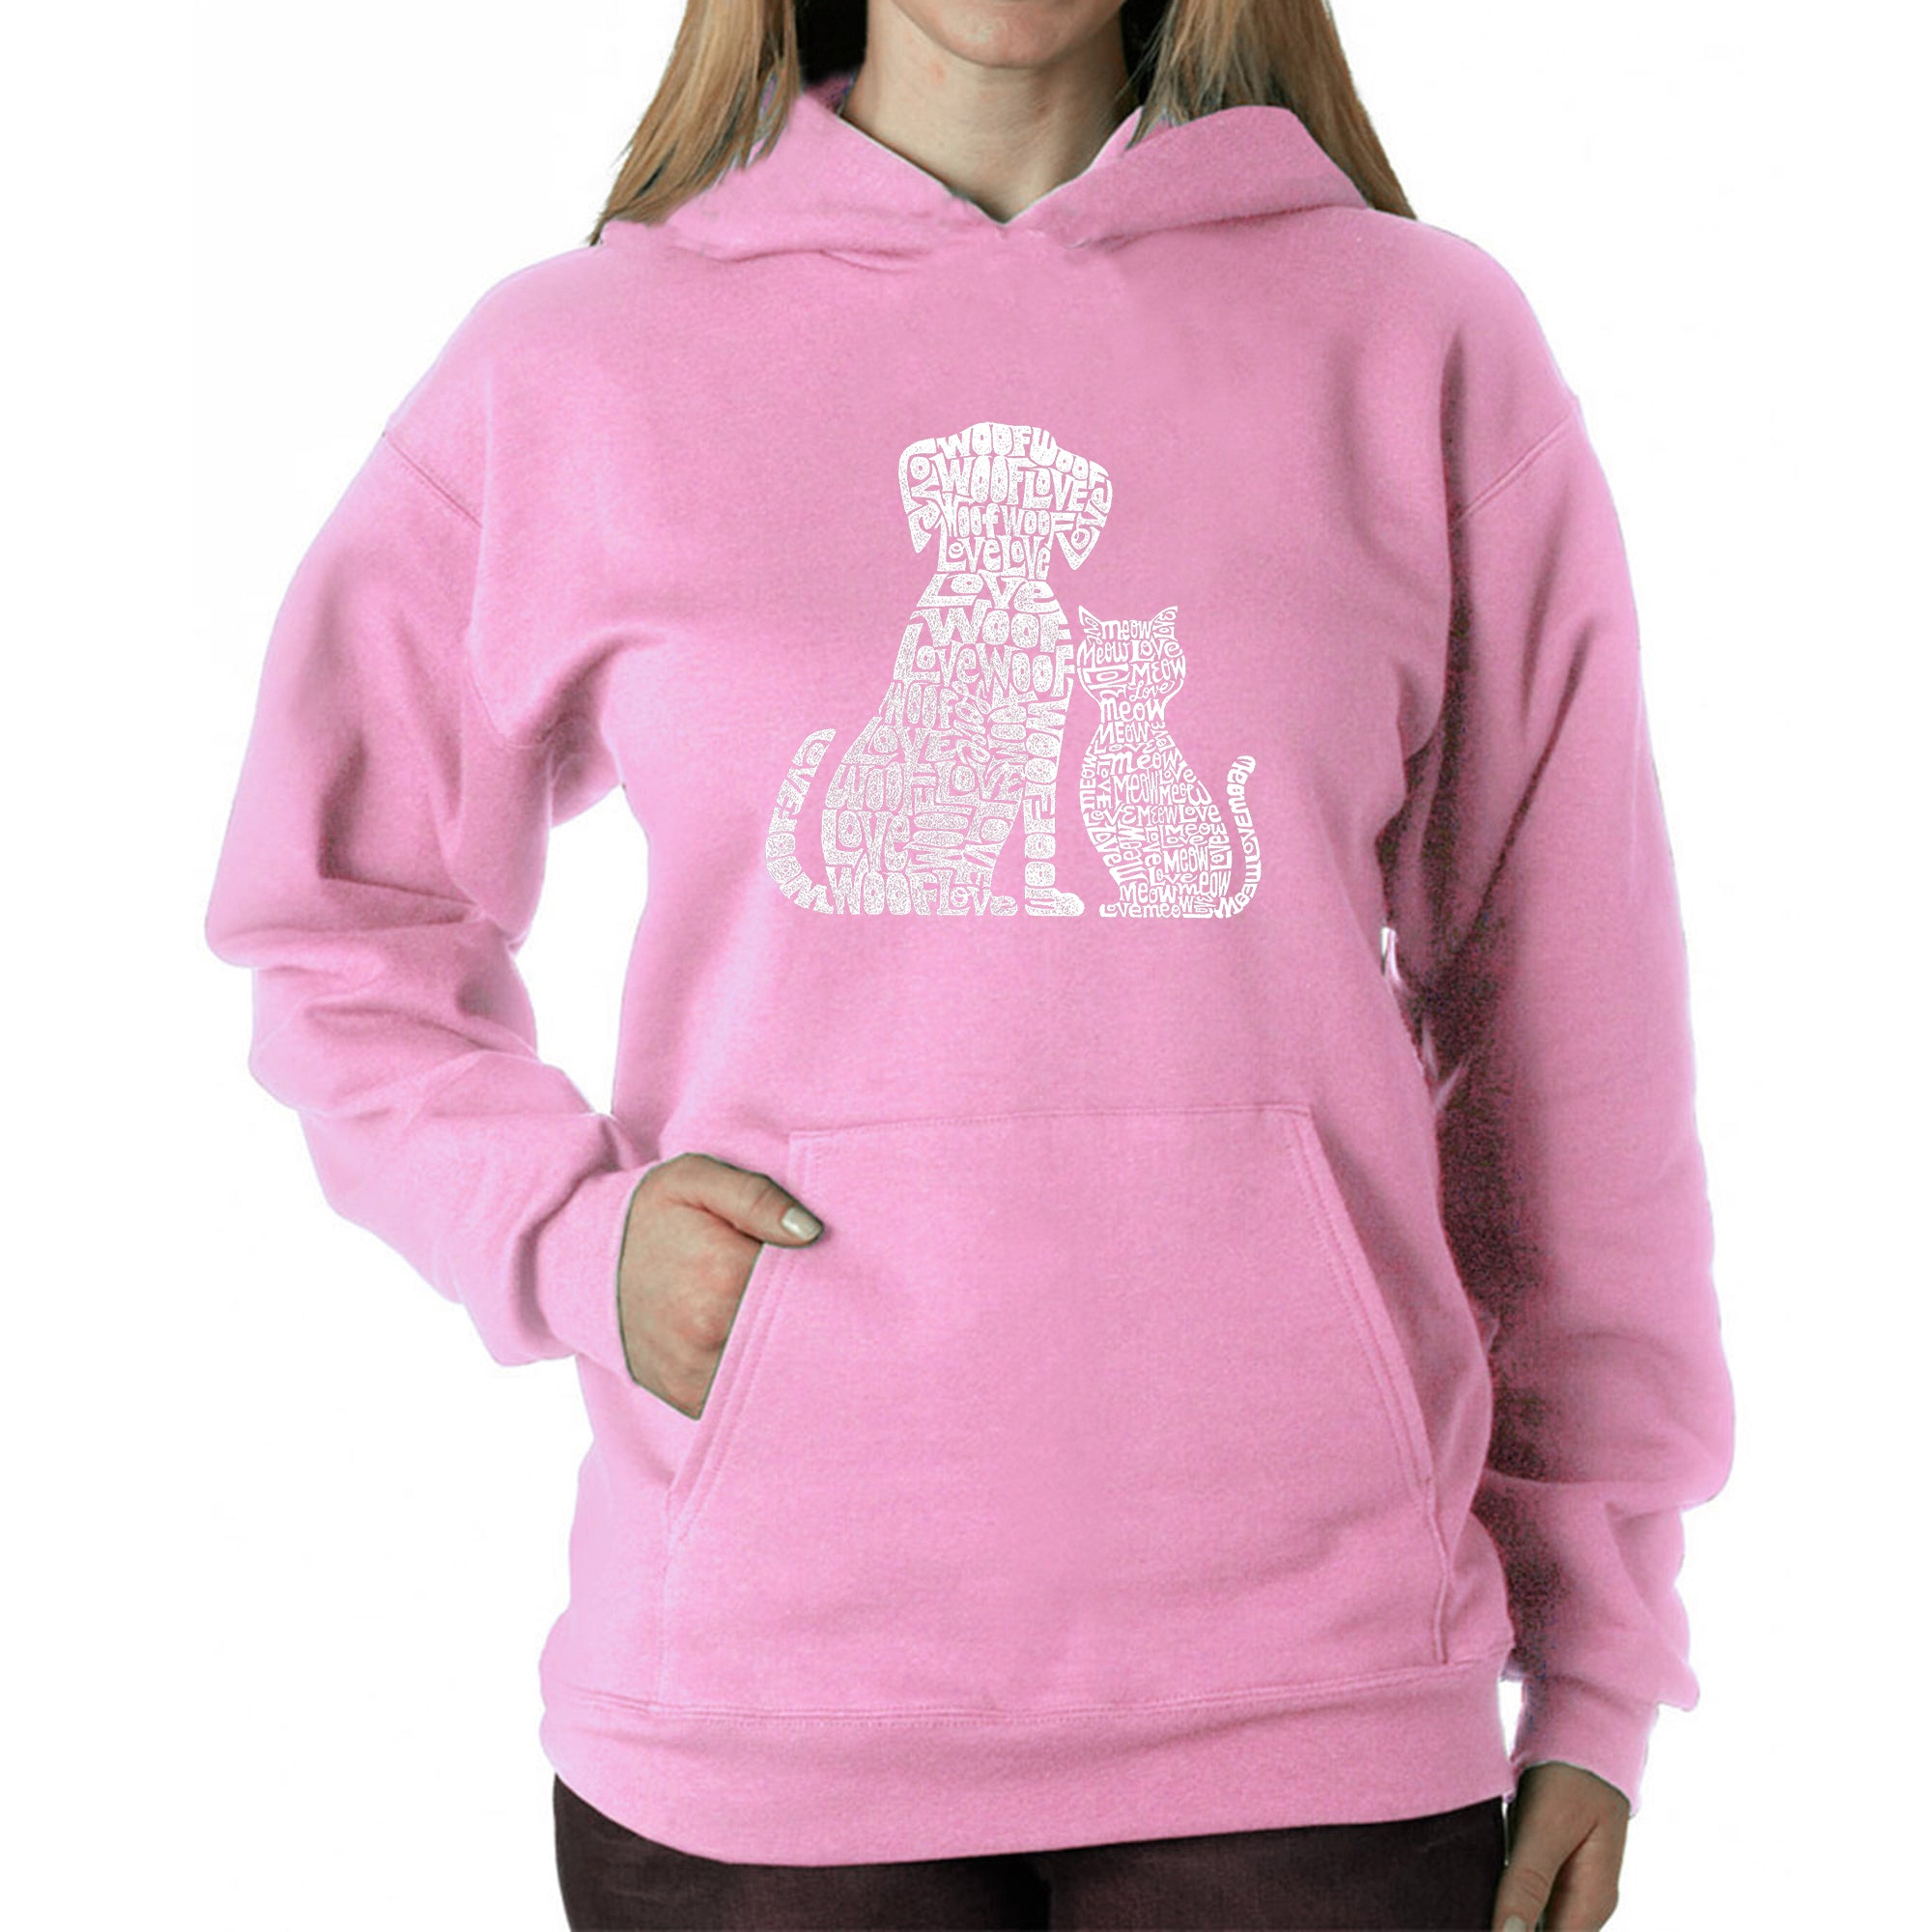 Dogs And Cats - Women's Word Art Hooded Sweatshirt - Pink - Large